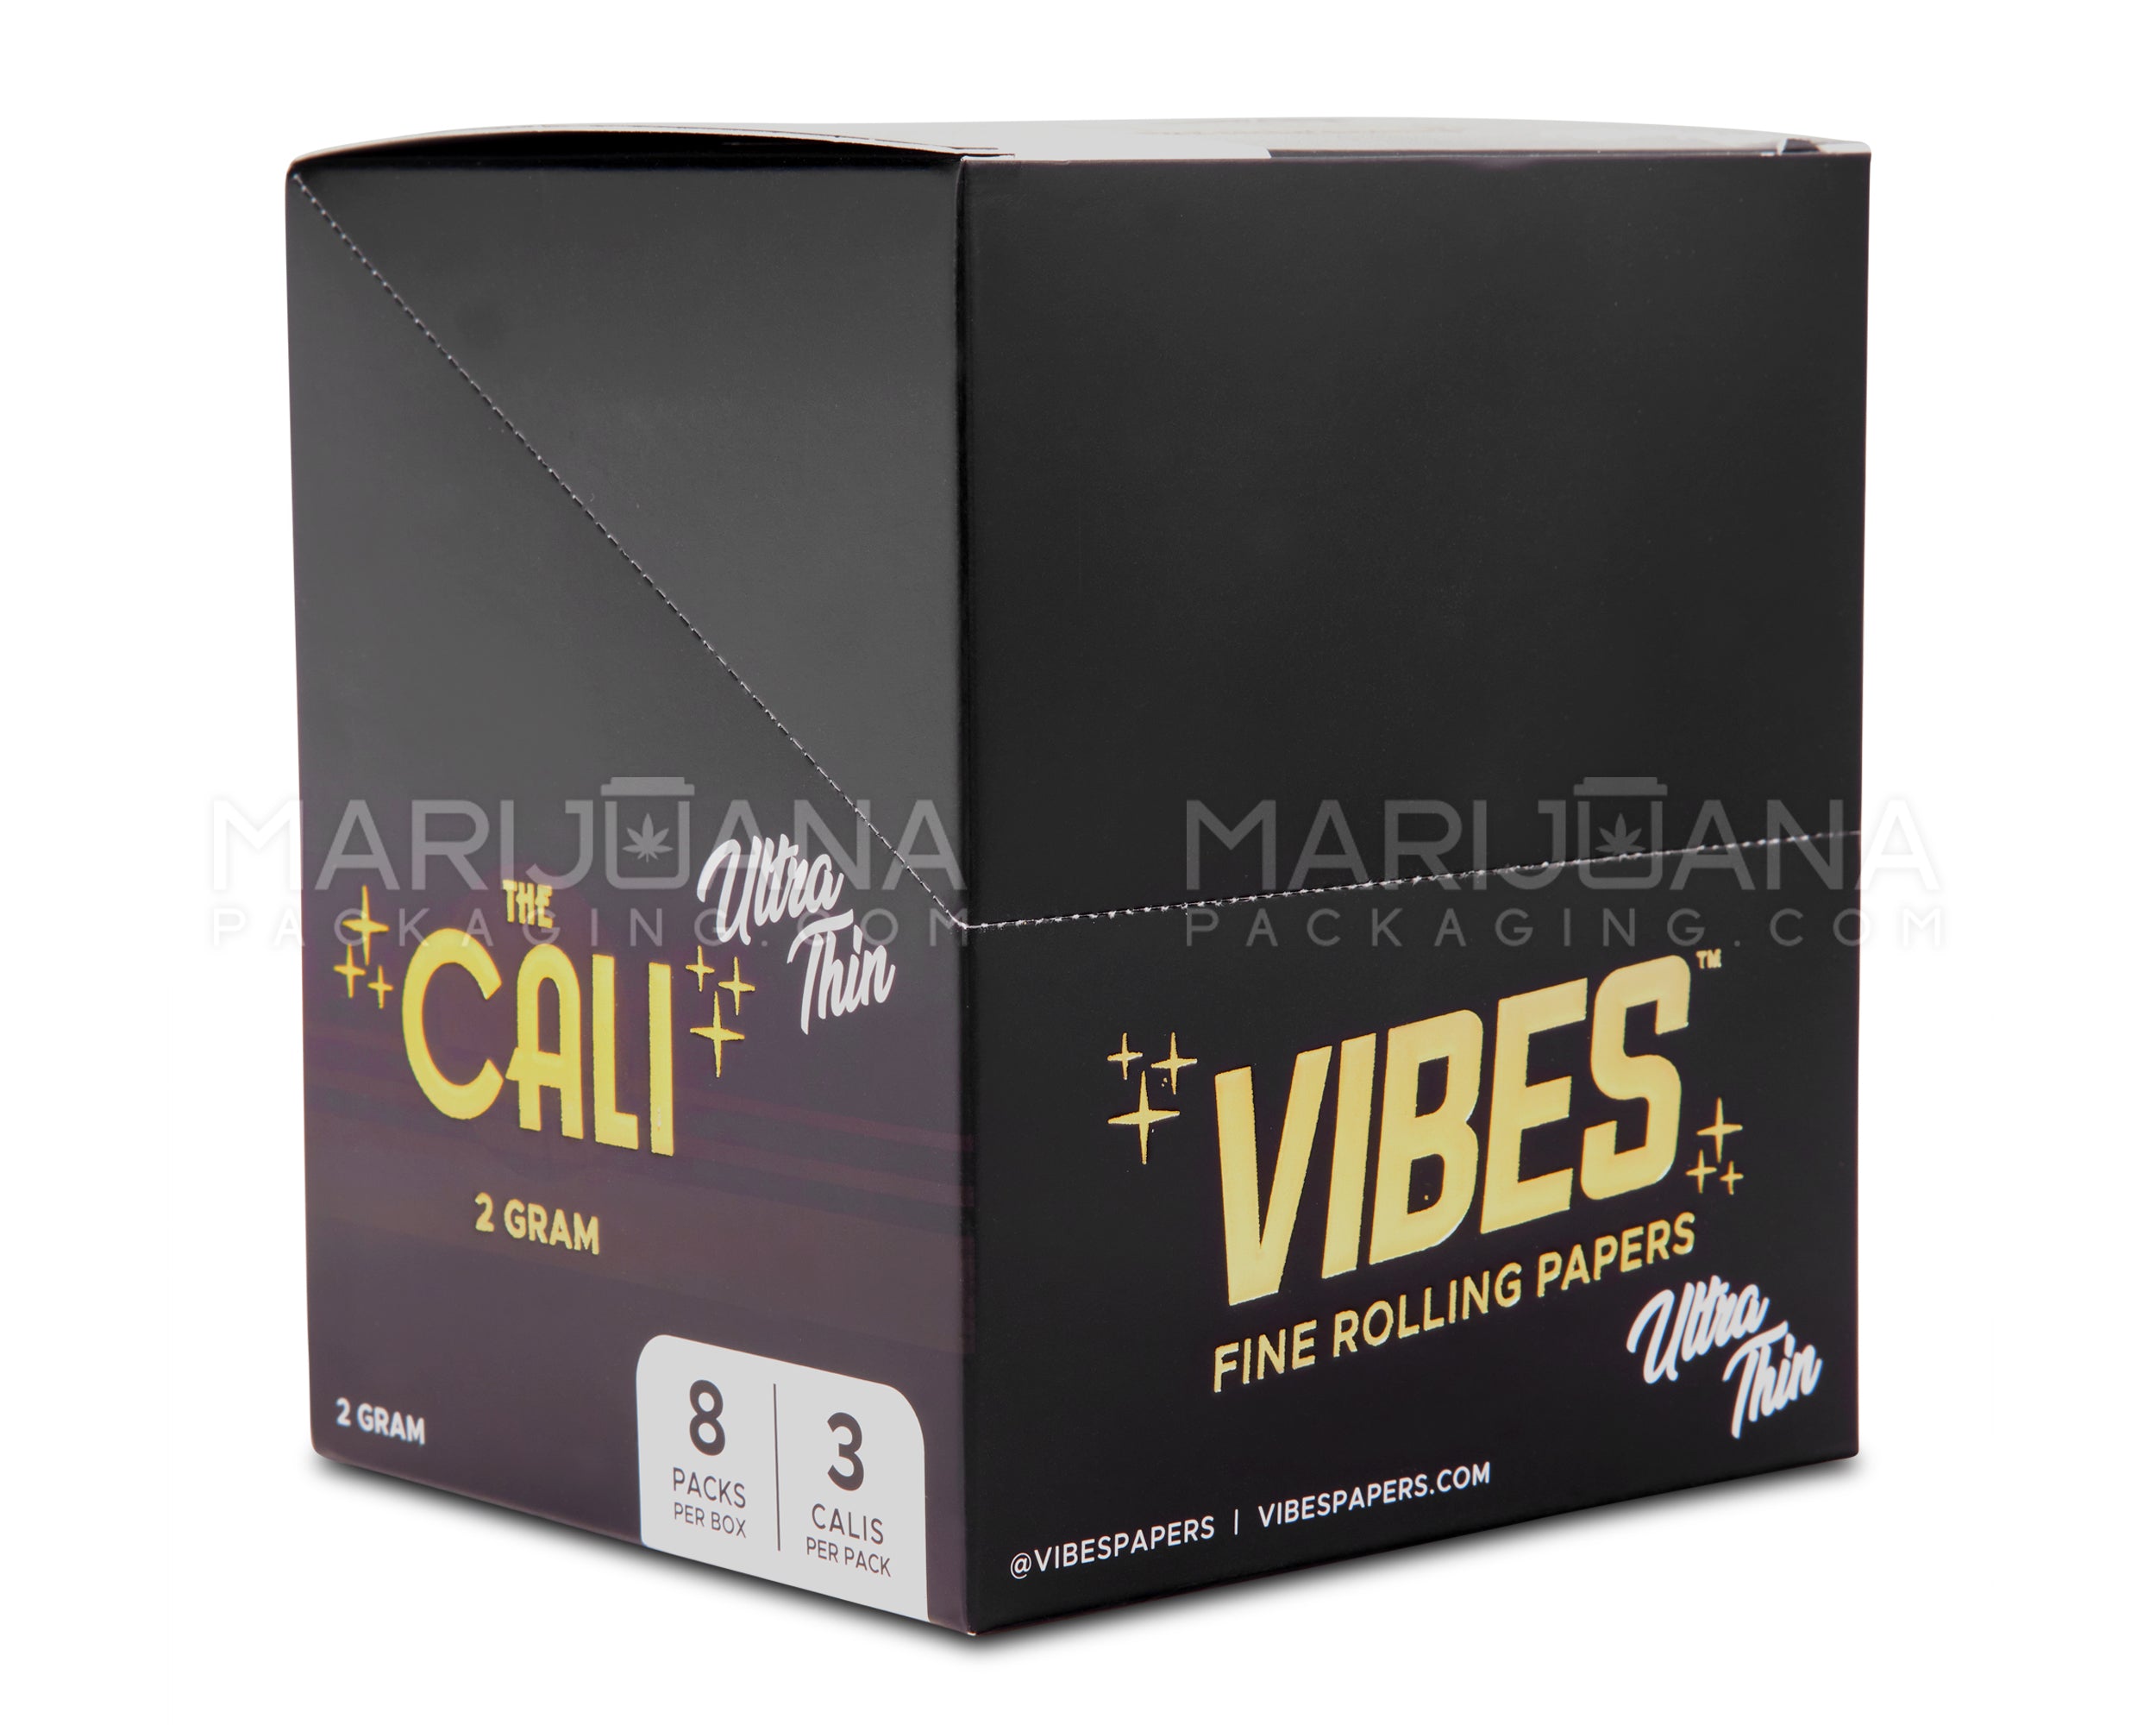 VIBES | 'Retail Display' The Cali 2 Gram Pre-Rolled Cones | 110mm - Ultra Thin Paper - 24 Count - 6